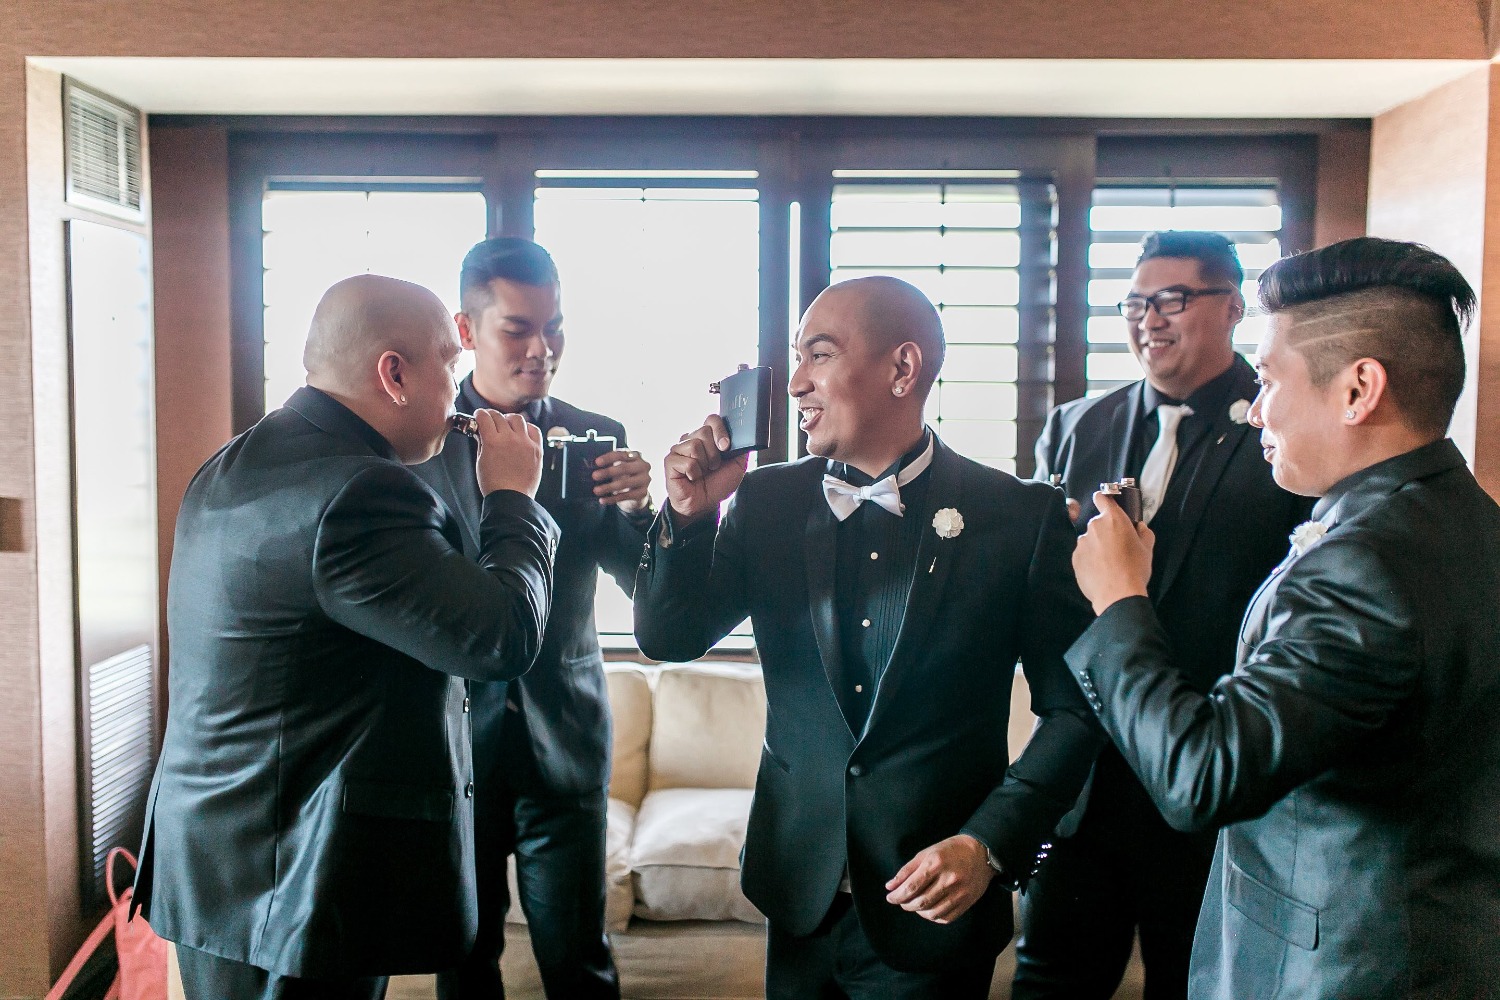 wedding-submission-from-michael-lao